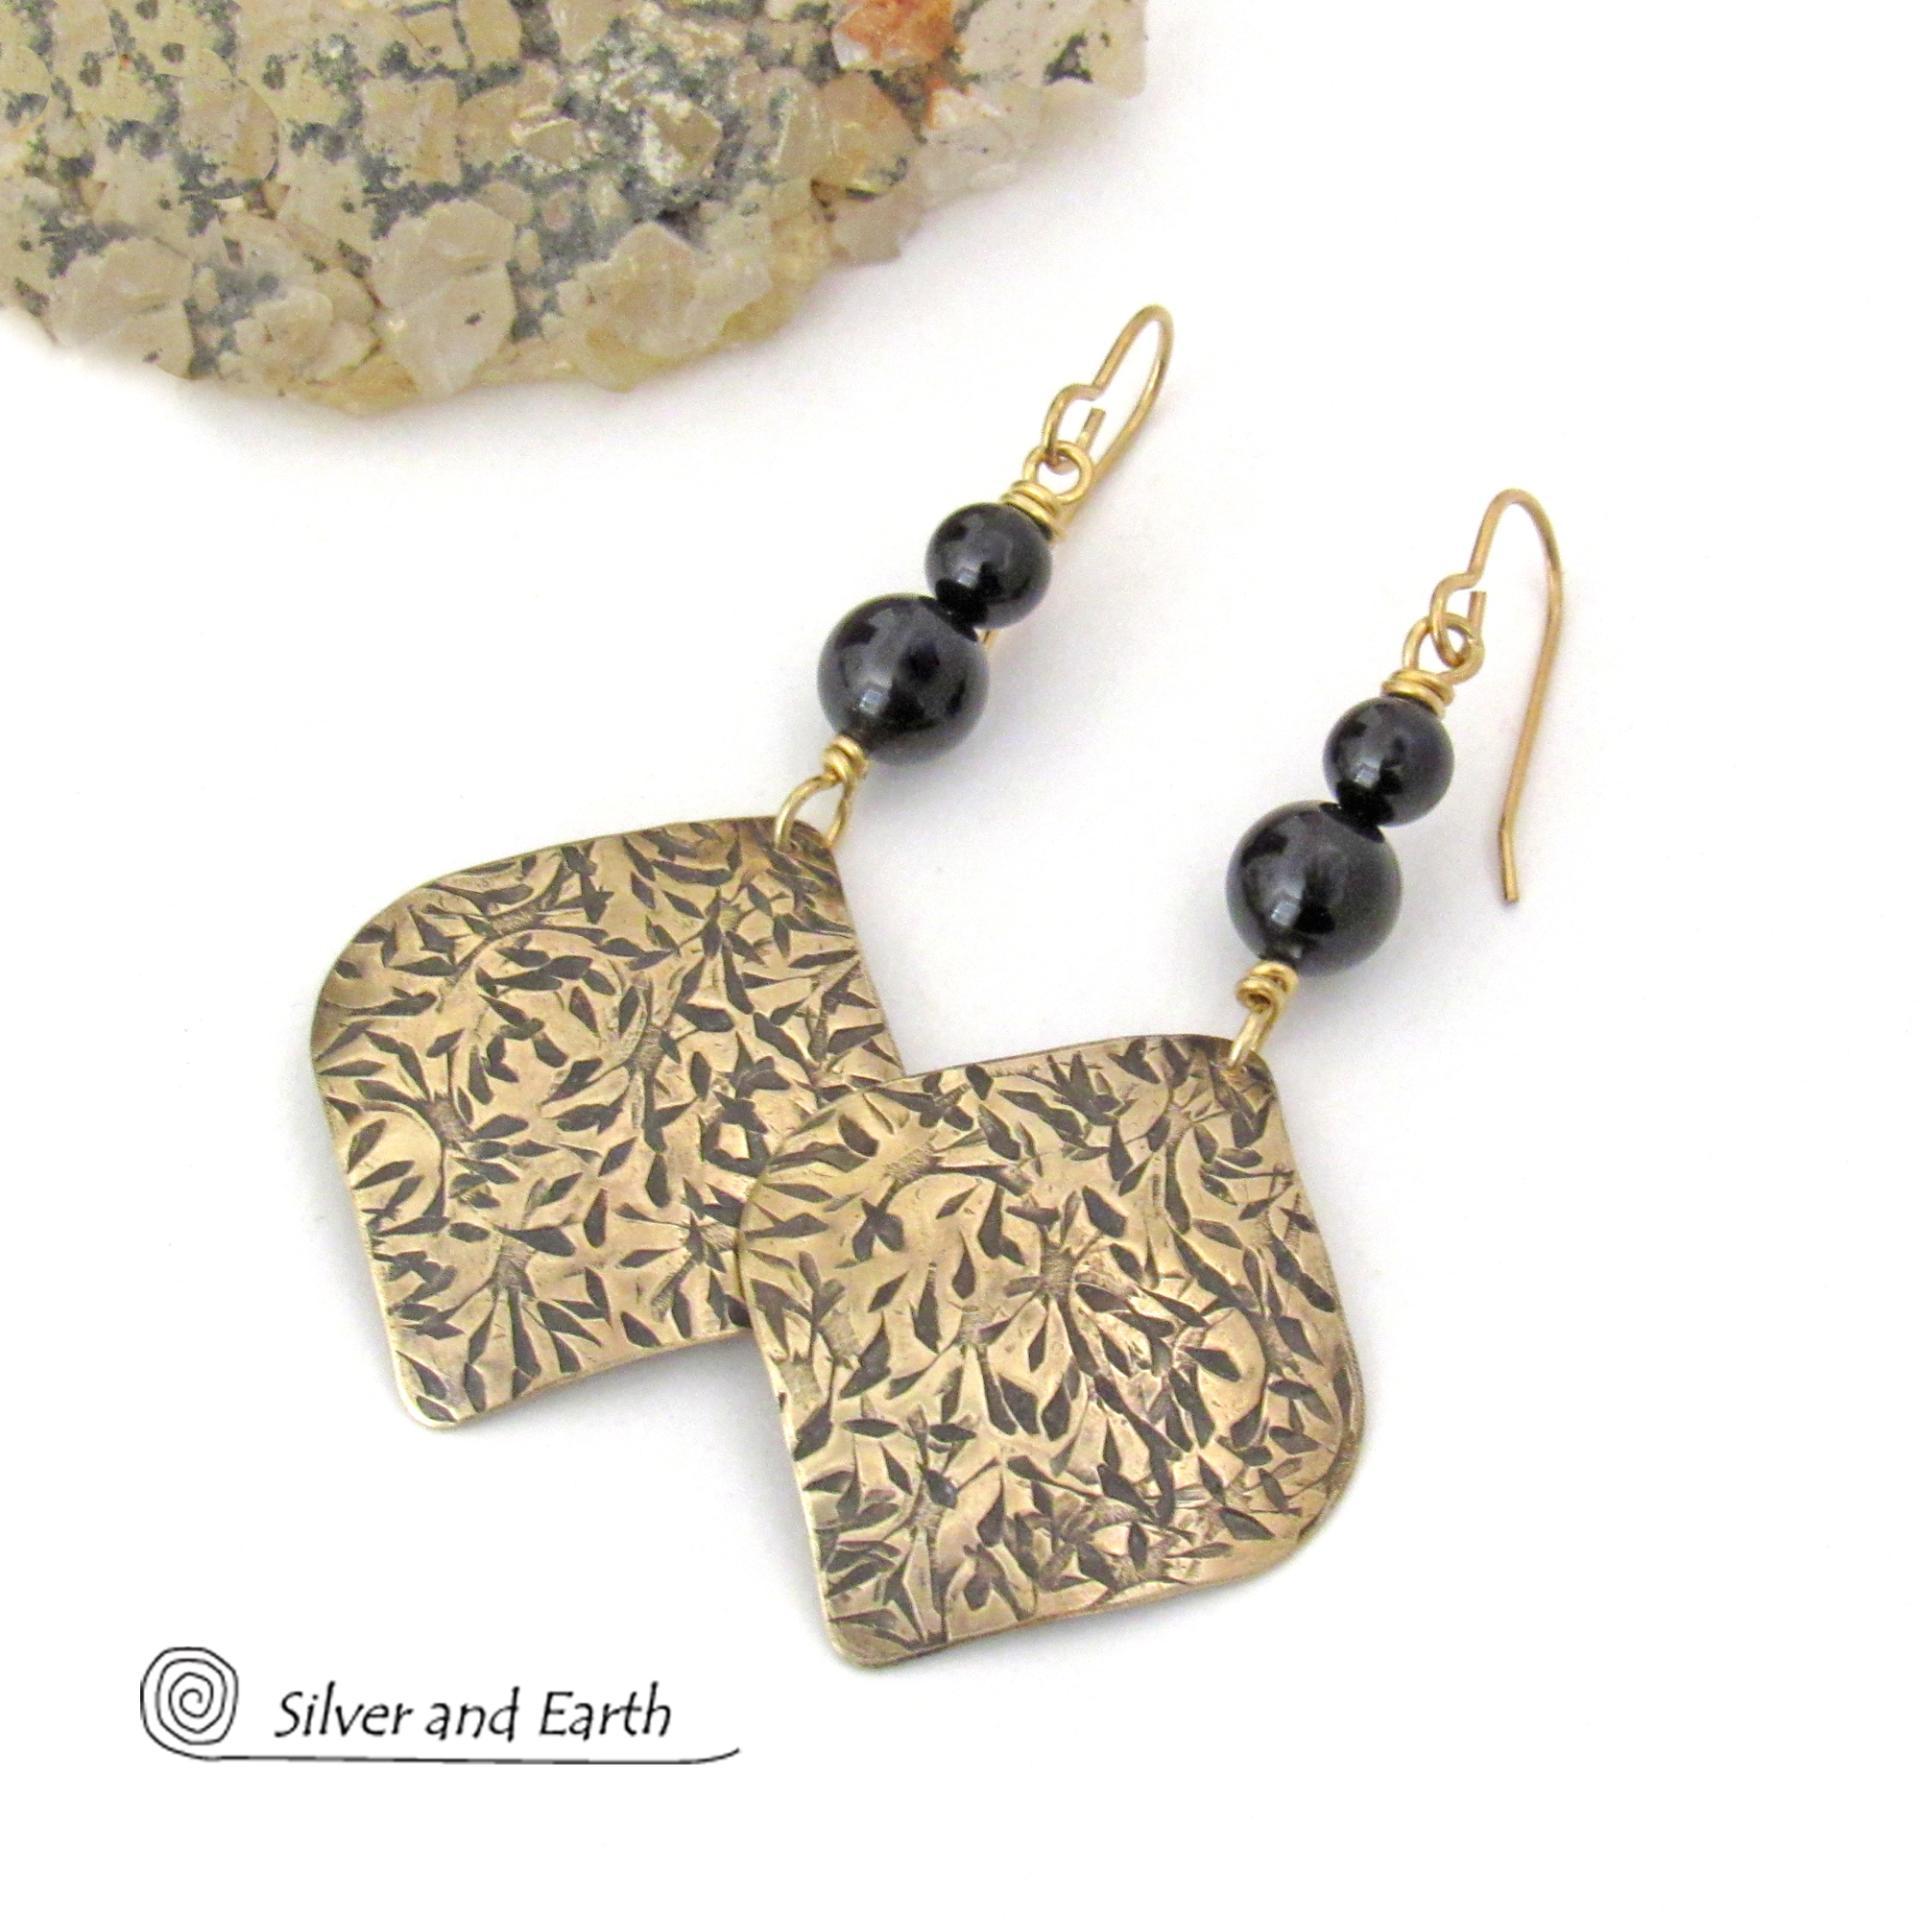 Textured Gold Brass Earrings with Black Onyx Gemstones - Bohemian Modern Chic Style Jewelry